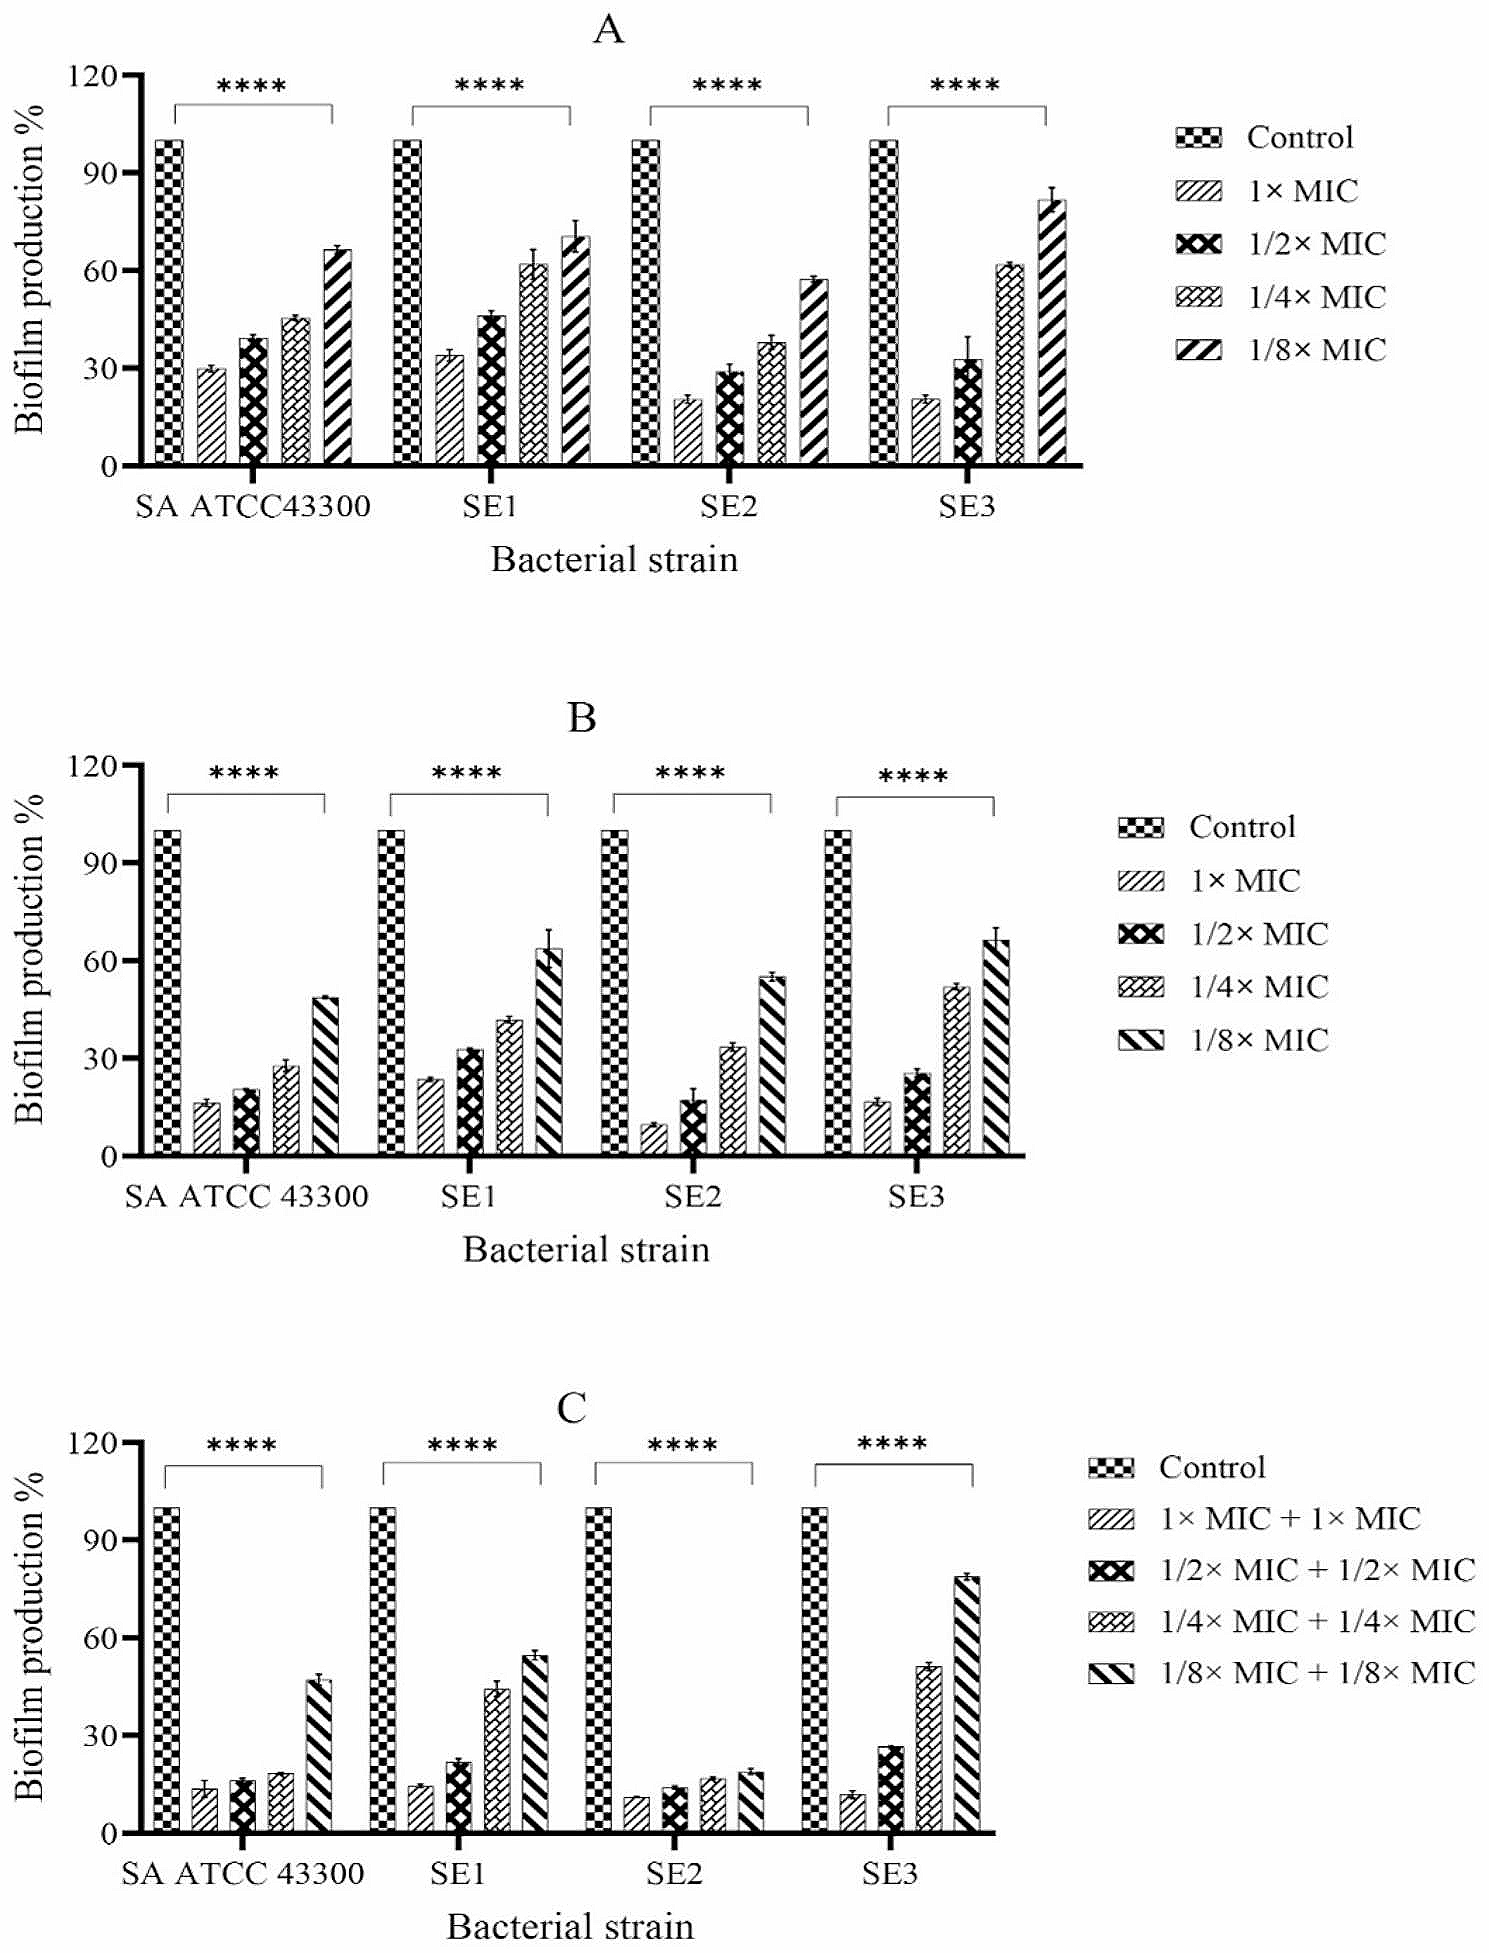 Combination antimicrobial therapy: in vitro synergistic effect of anti-staphylococcal drug oxacillin with antimicrobial peptide nisin against Staphylococcus epidermidis clinical isolates and Staphylococcus aureus biofilms